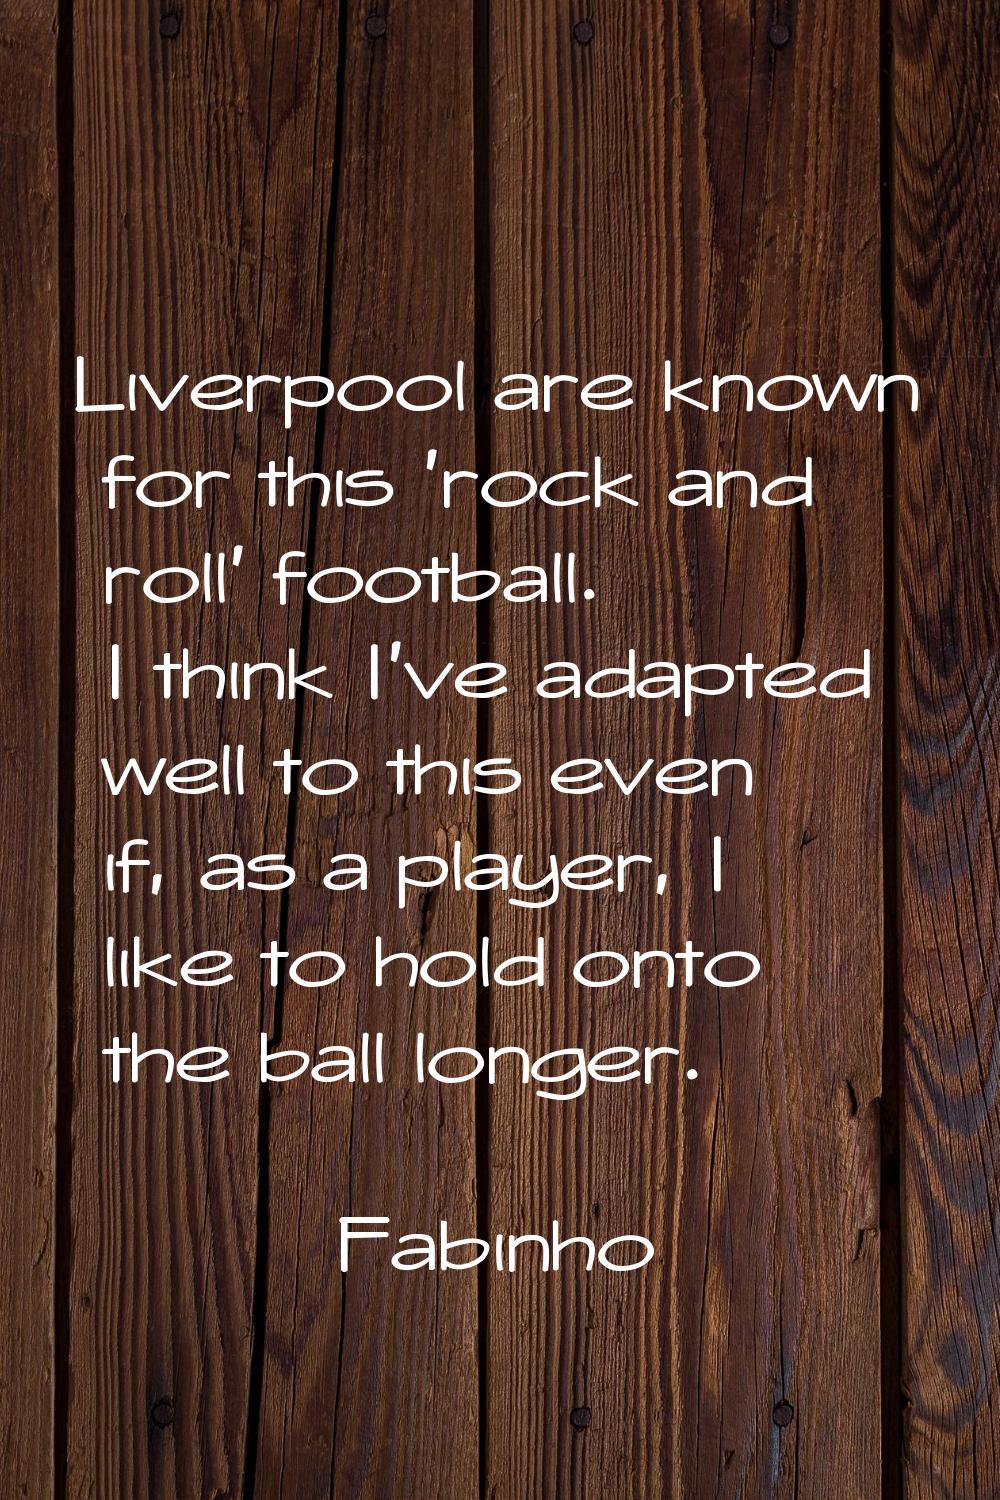 Liverpool are known for this 'rock and roll' football. I think I've adapted well to this even if, a